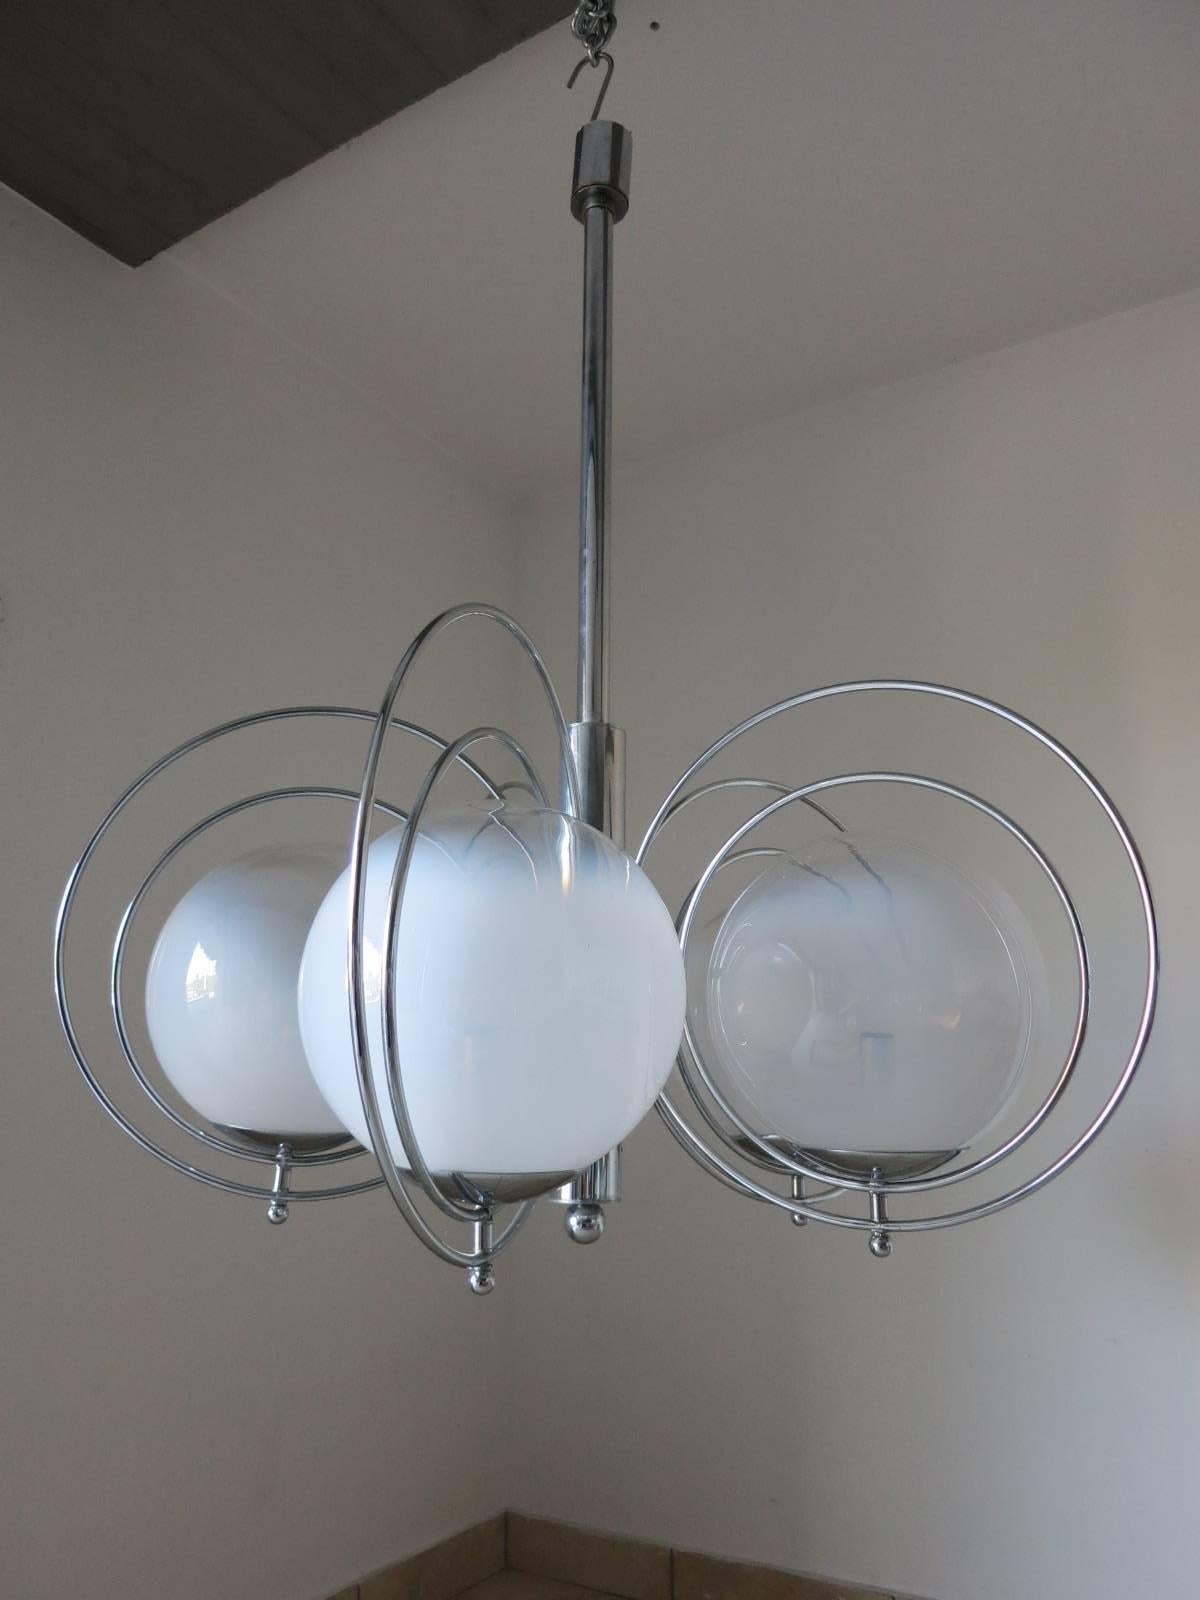 Vintage Italian pendant chandelier with five glossy white Murano glass globes and chrome frame / Designed by Goffredo Reggiani circa 1960’s / Made in Italy 
5 lights / E26 or E27 type / max 60W each
Diameter: 36 inches / Height: 42 inches including